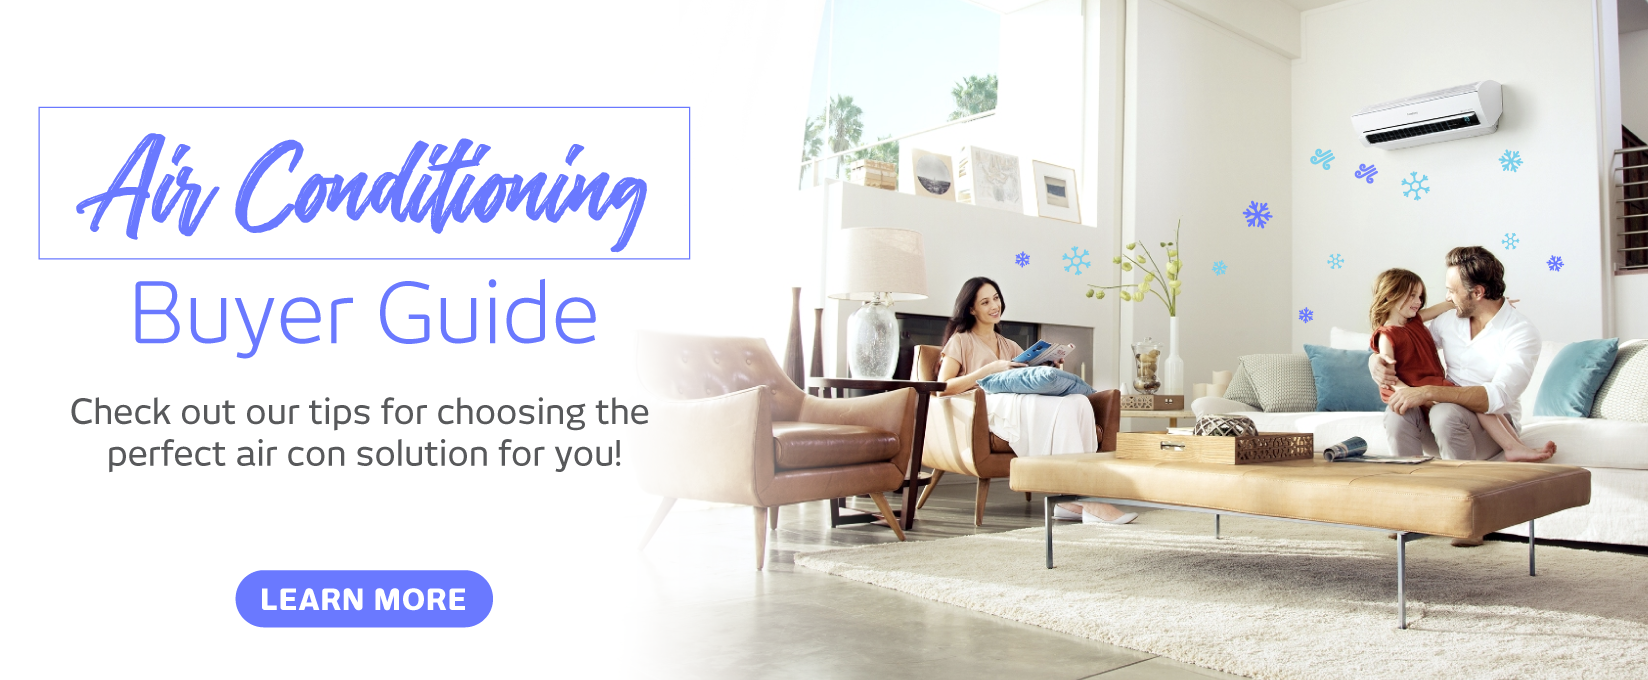 Air Conditioning Buying Guide